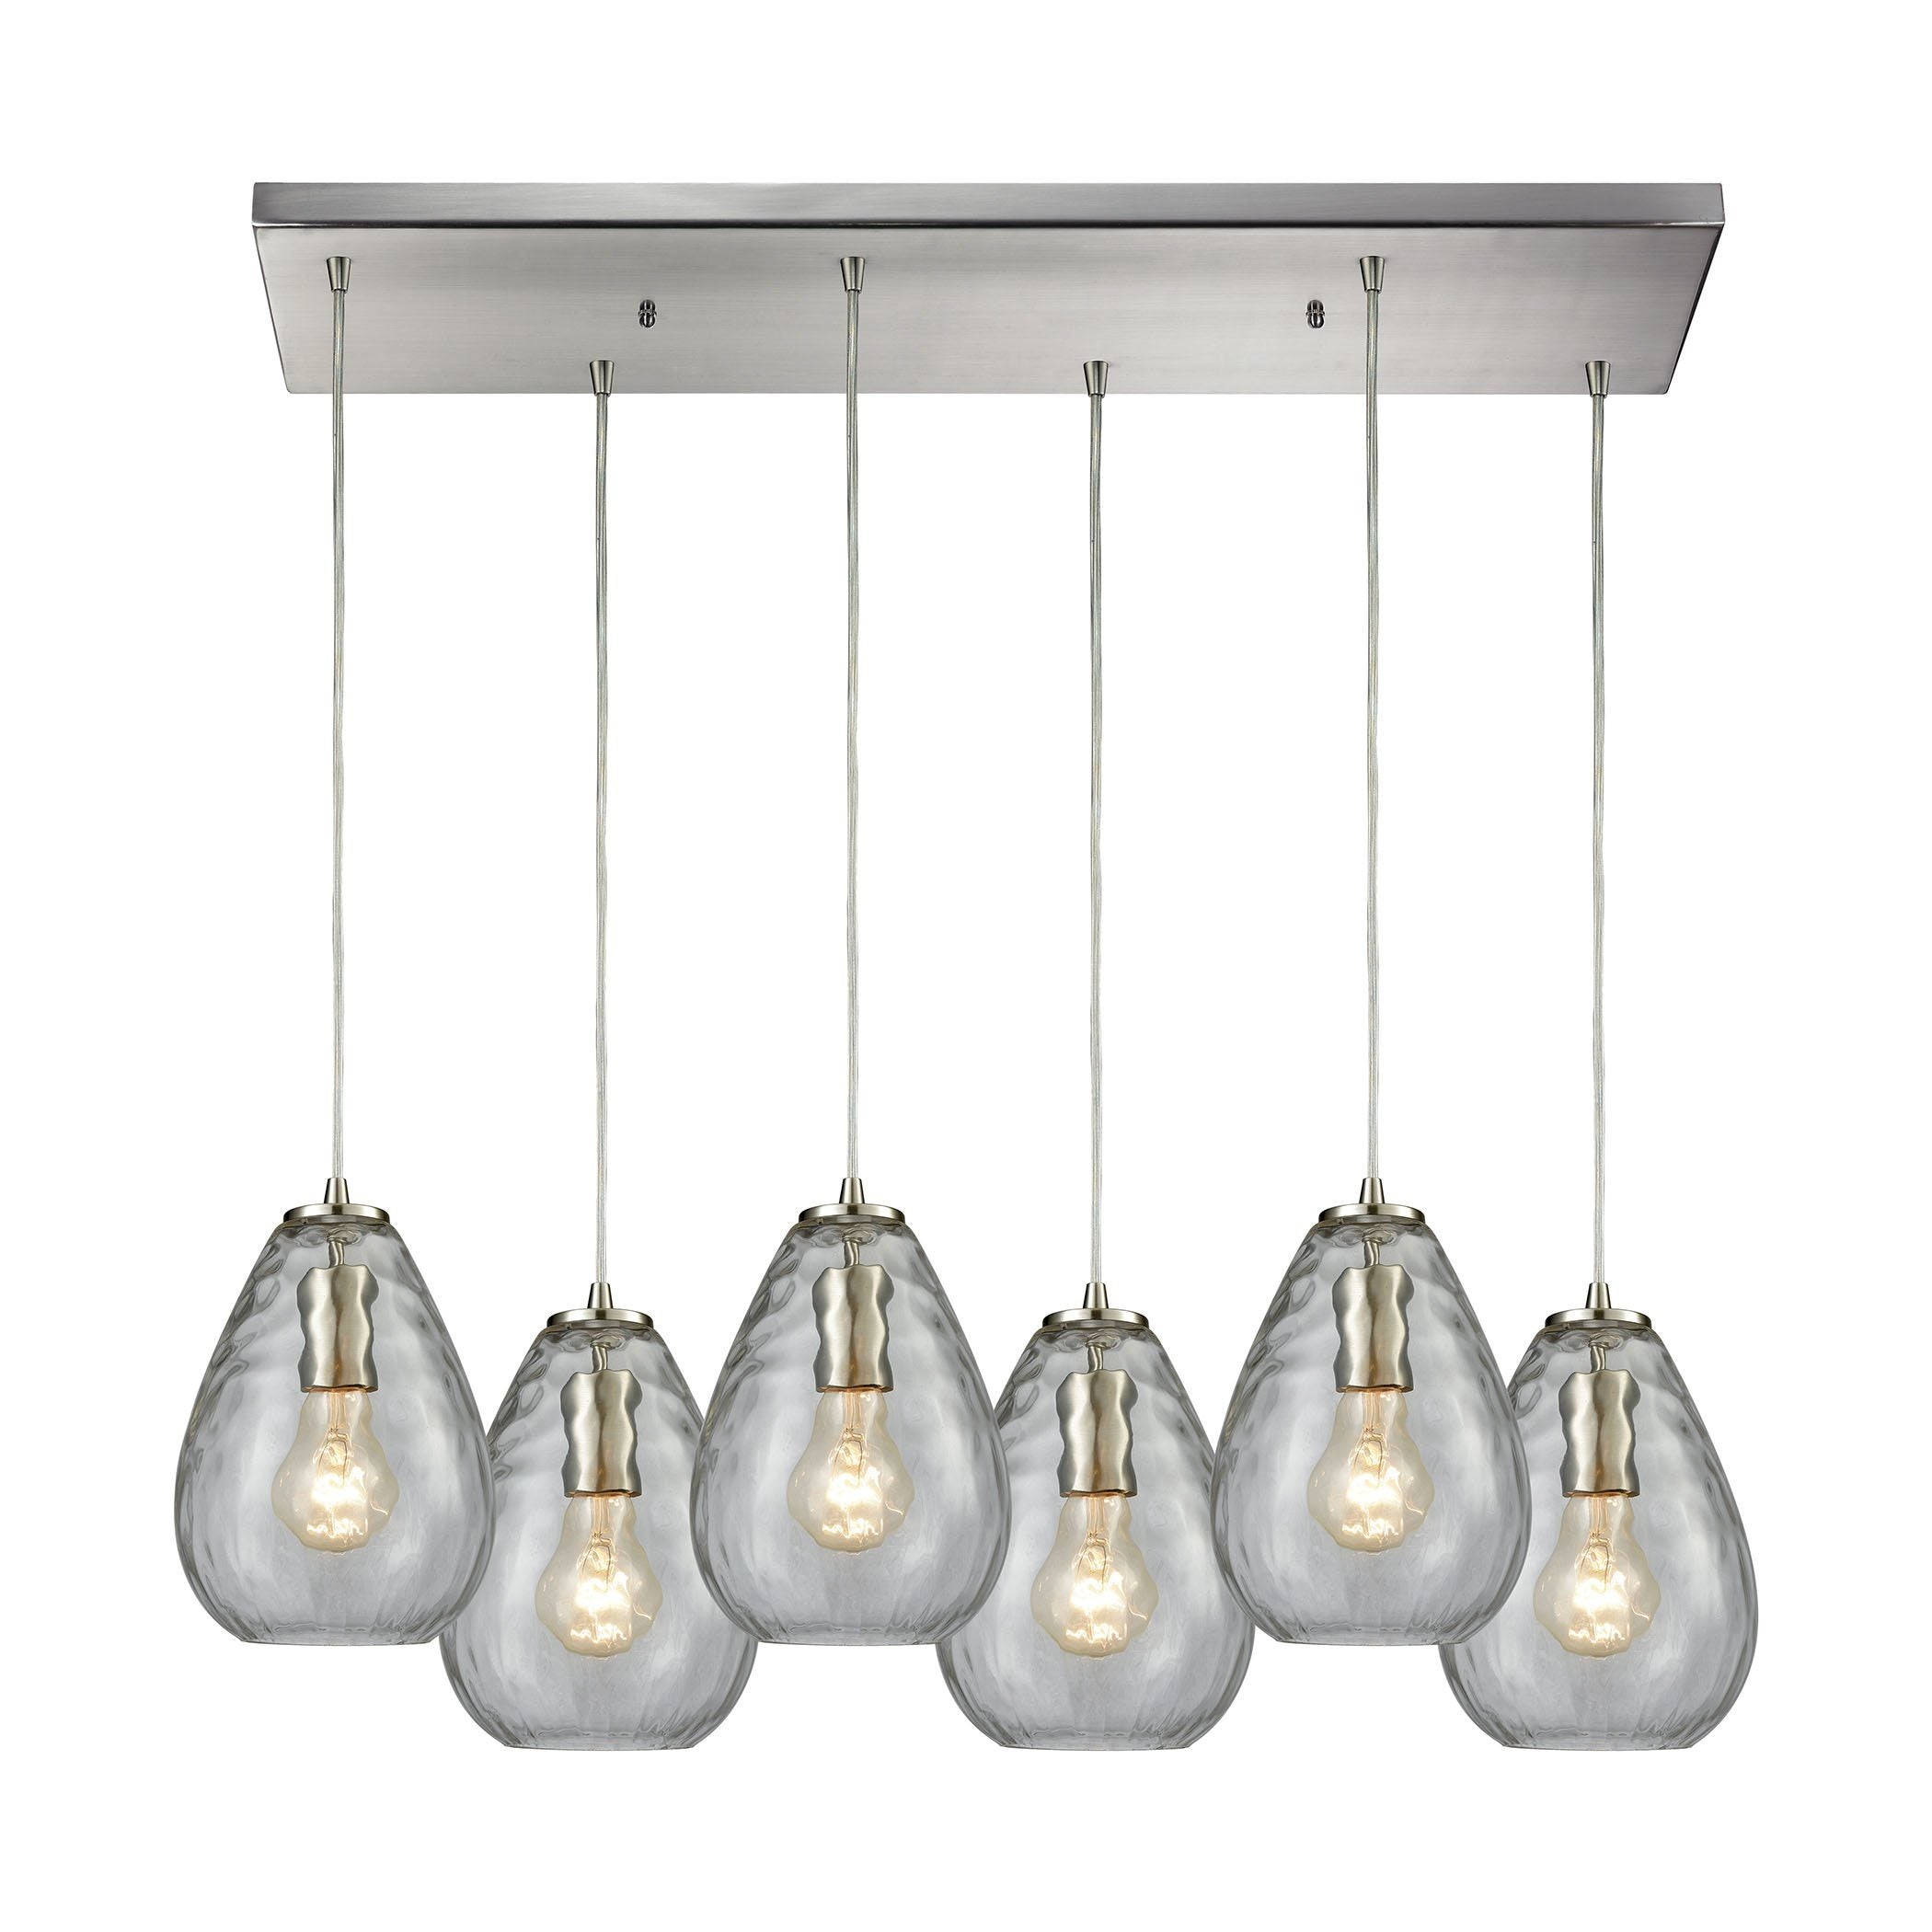 Lagoon 6-Light Rectangle In Satin Nickel With Clear Water Glass Pendant Ceiling Elk Lighting 